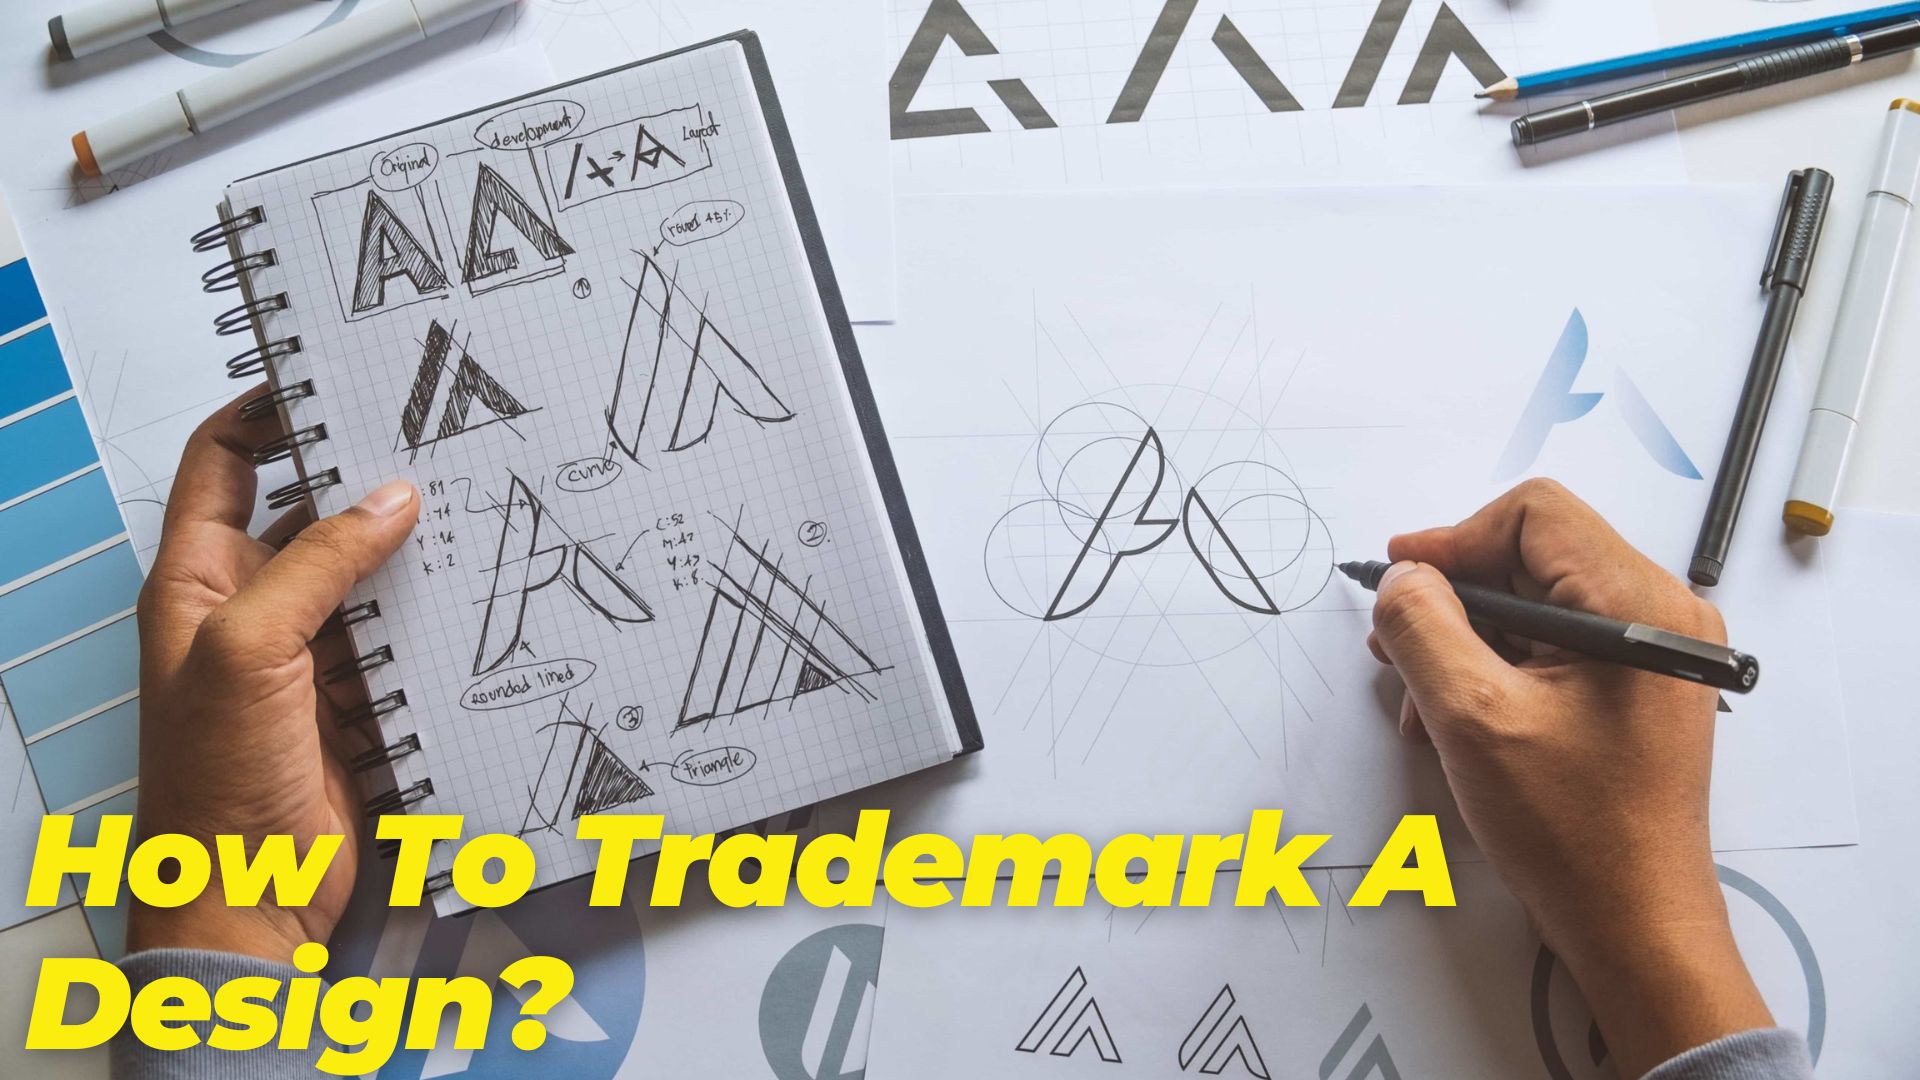 How To Trademark A Design?